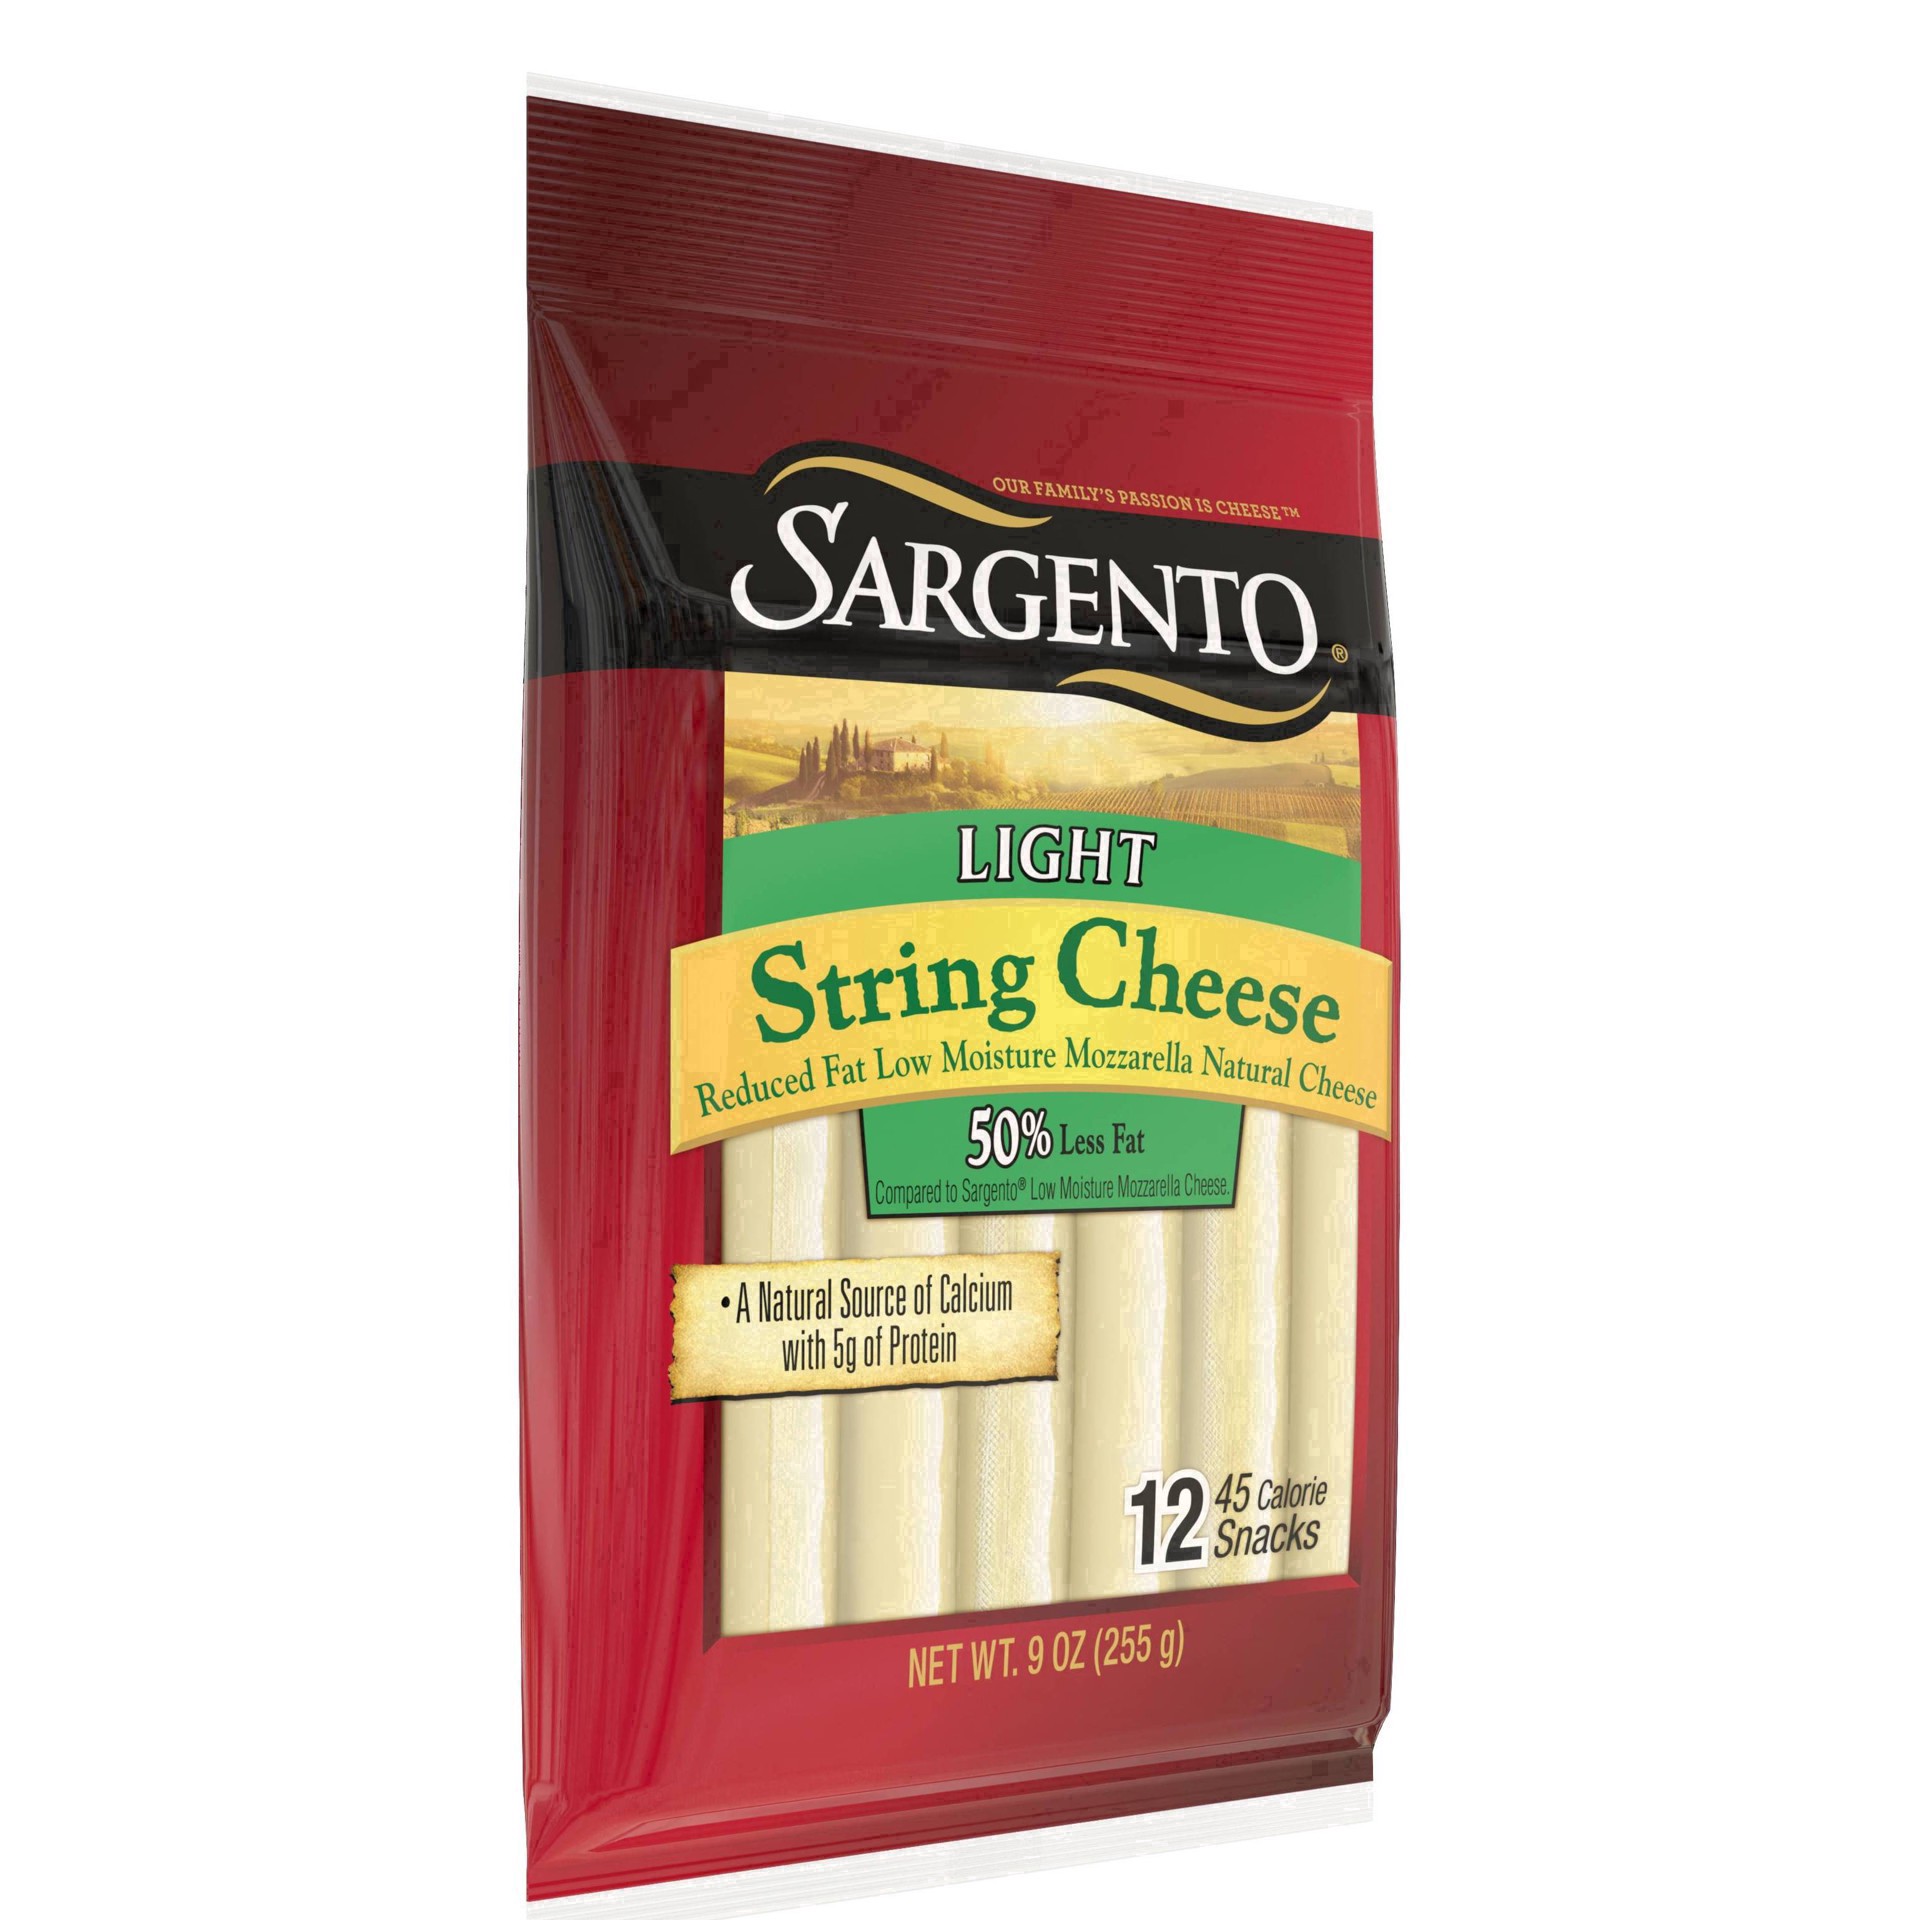 slide 17 of 62, Sargento Reduced Fat Low Moisture Part-Skim Mozzarella Natural Cheese Light String Cheese Snacks, 9 oz., 12-Count, 9 oz